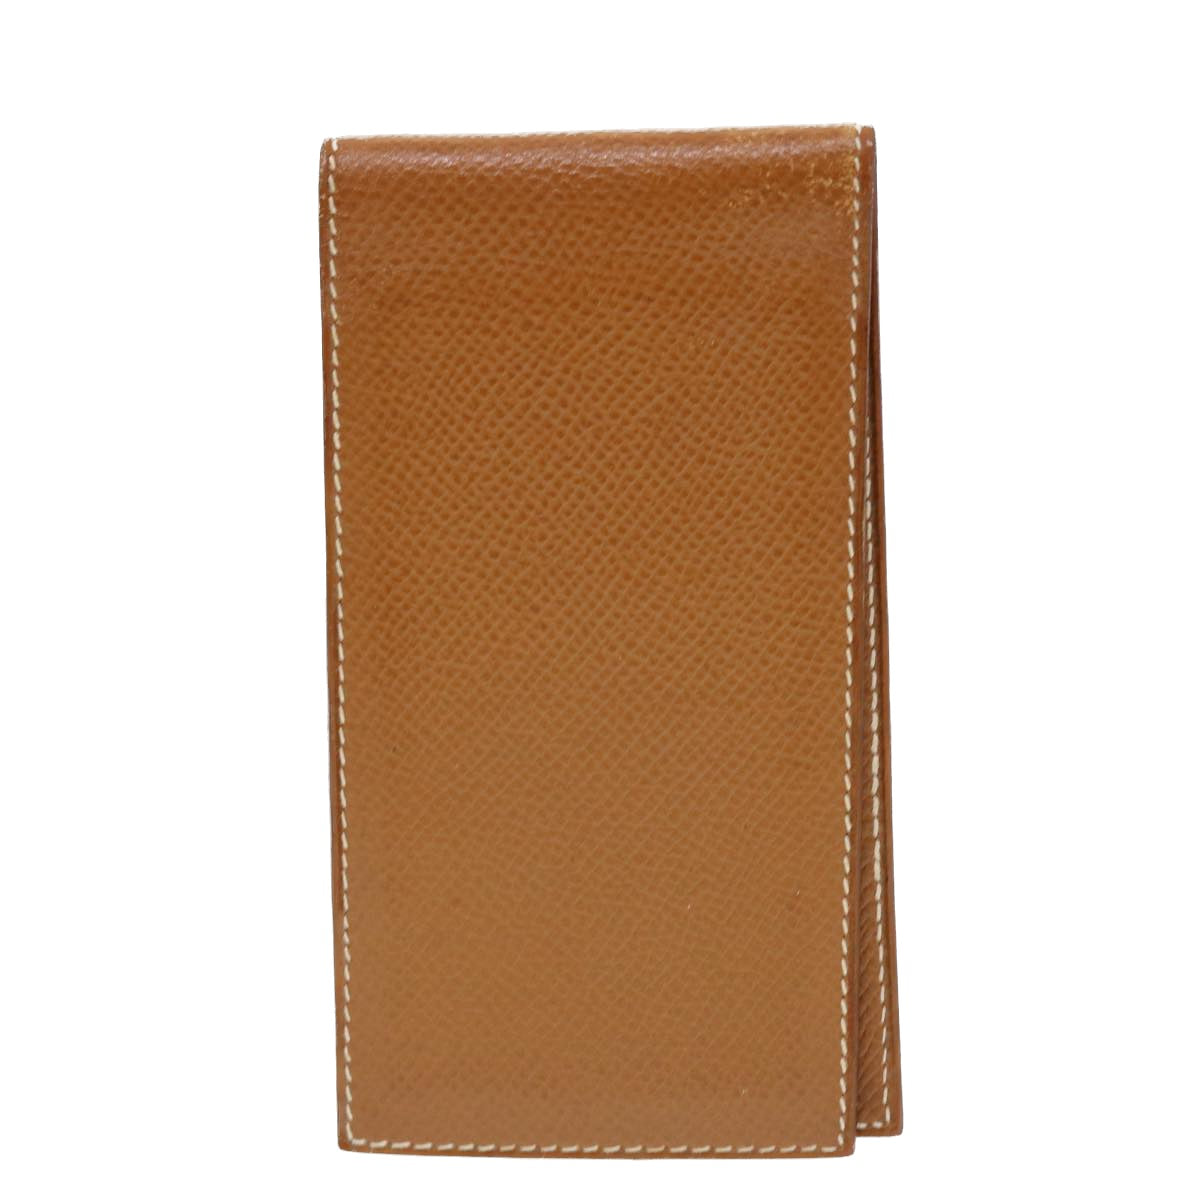 HERMES Memo Holder Day Planner Cover Leather Brown Auth ar9271B - 0